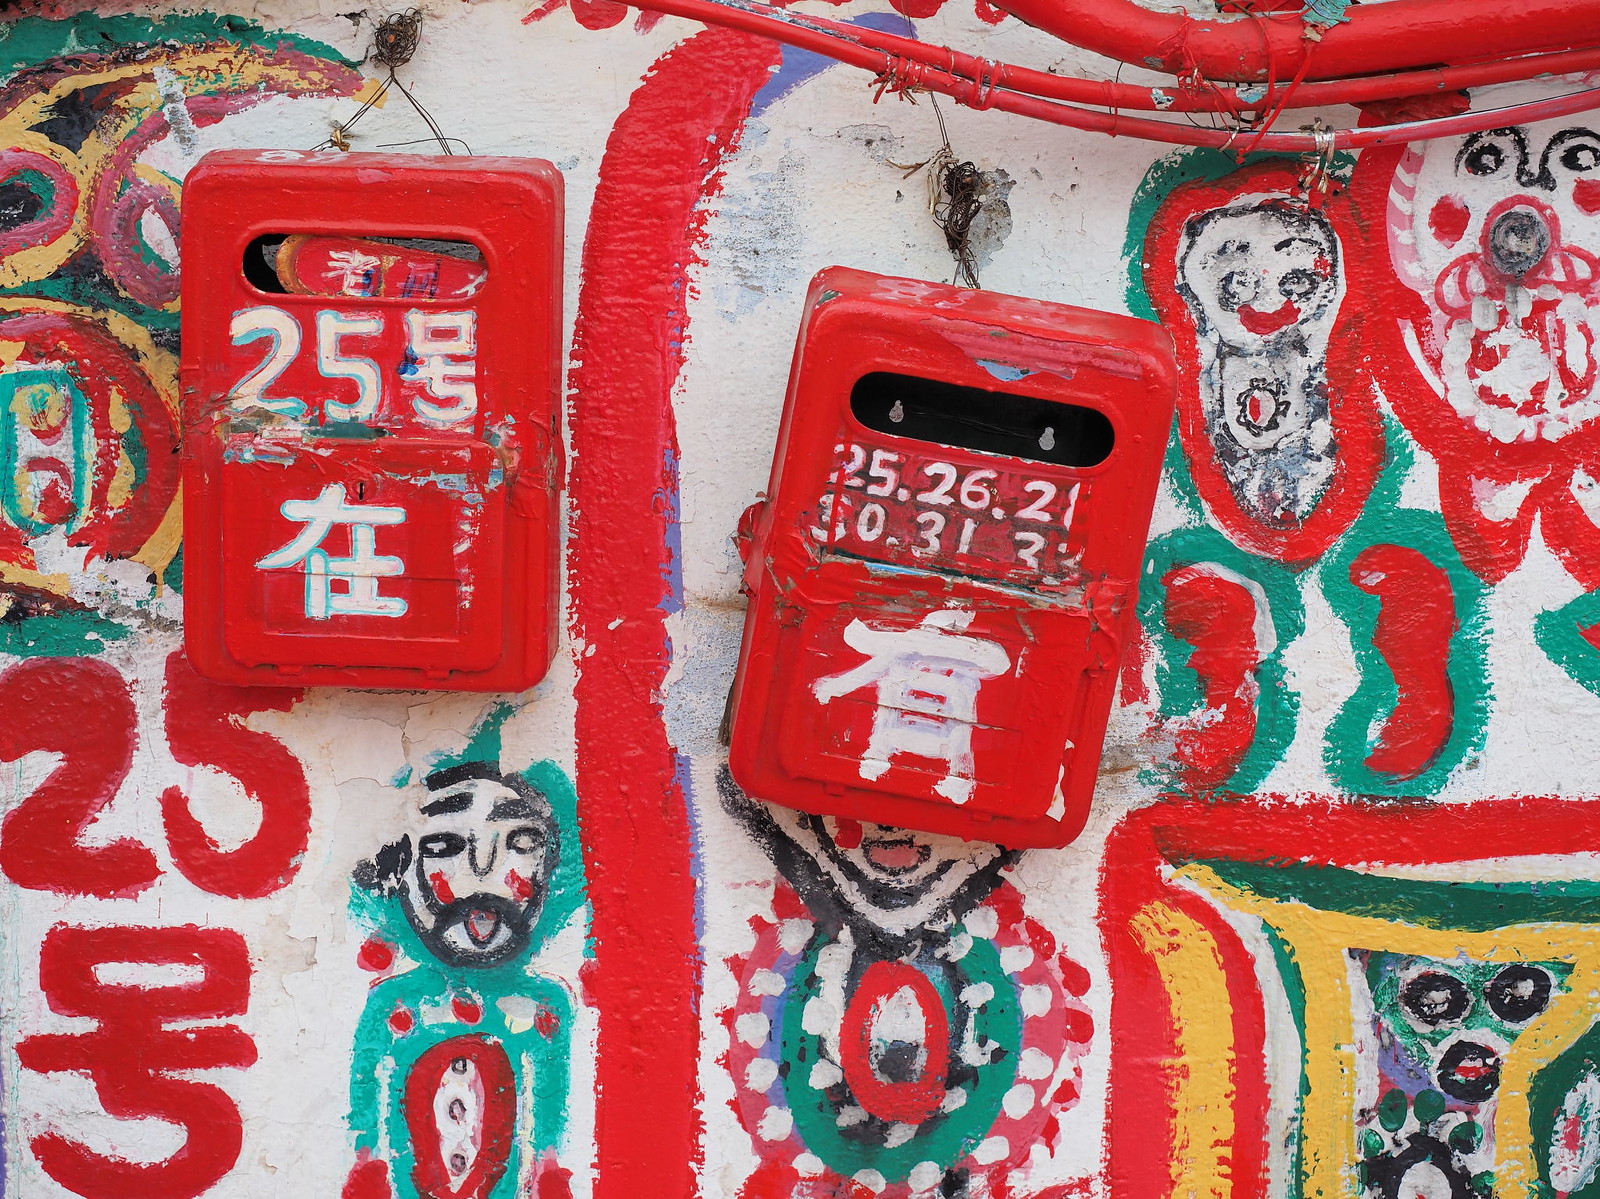 Painted mail boxes at Rainbow Village (彩虹眷村)